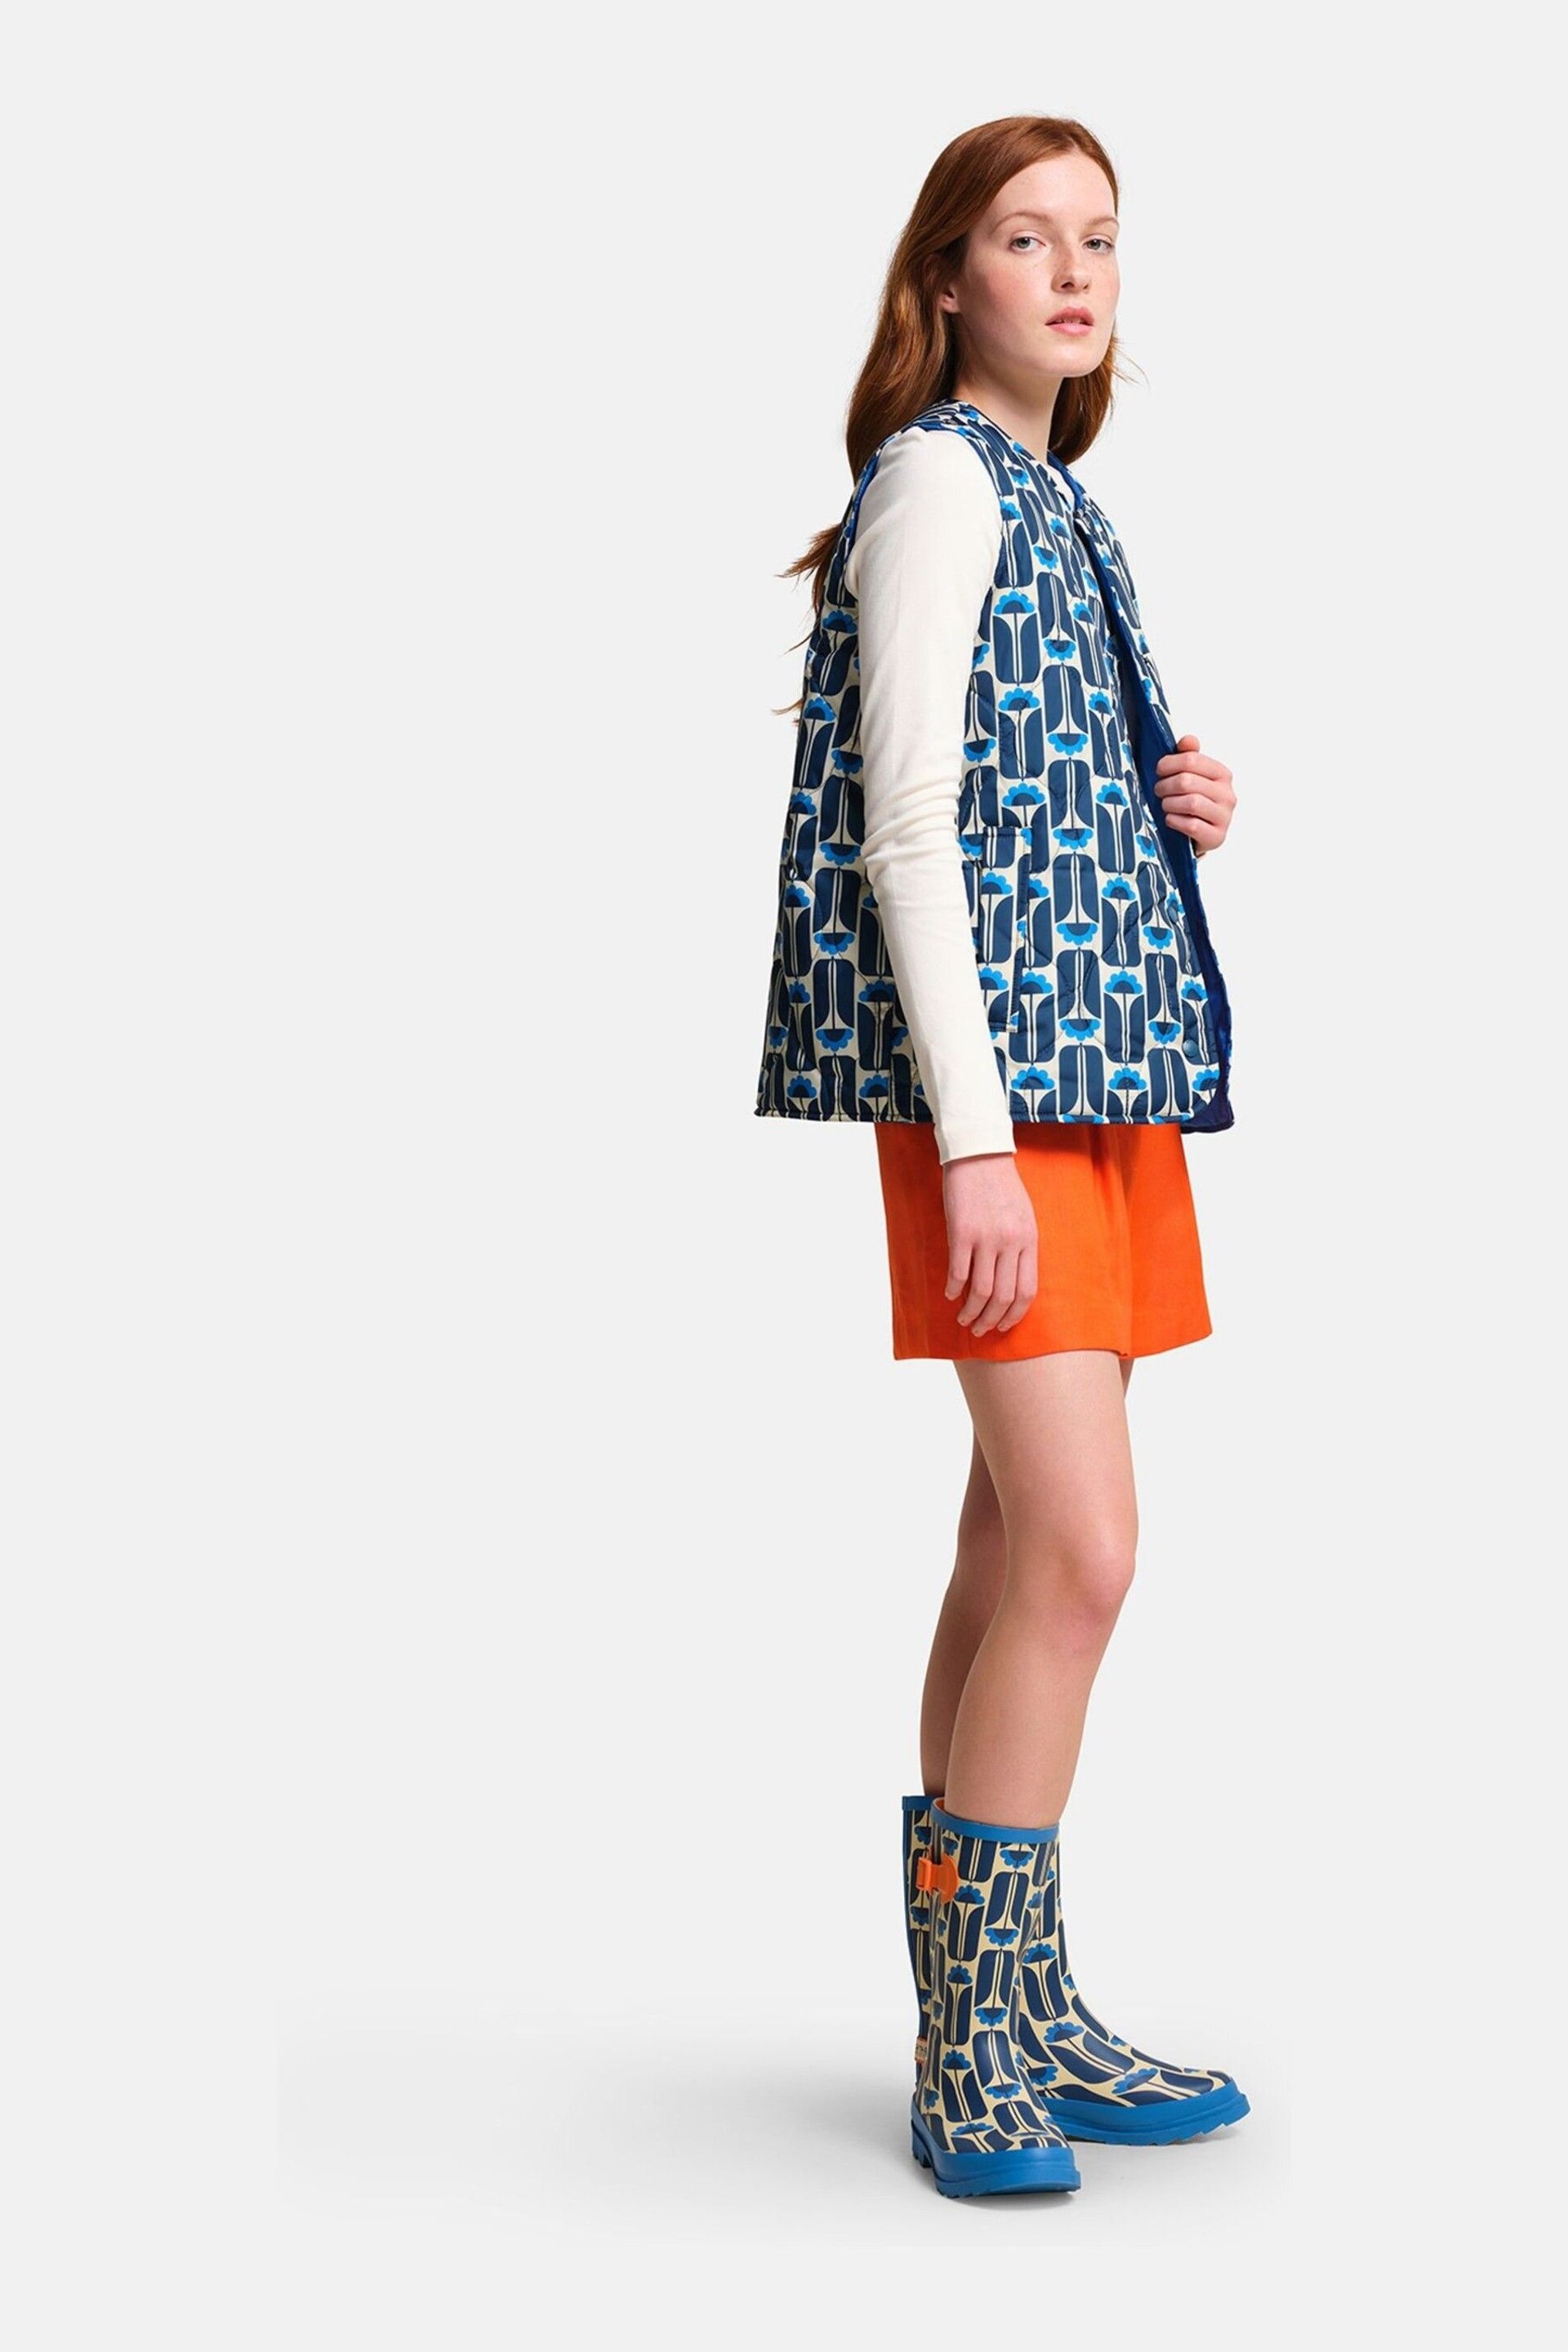 Regatta Blue Orla Kiely Printed Quilted Gilet - Image 2 of 6